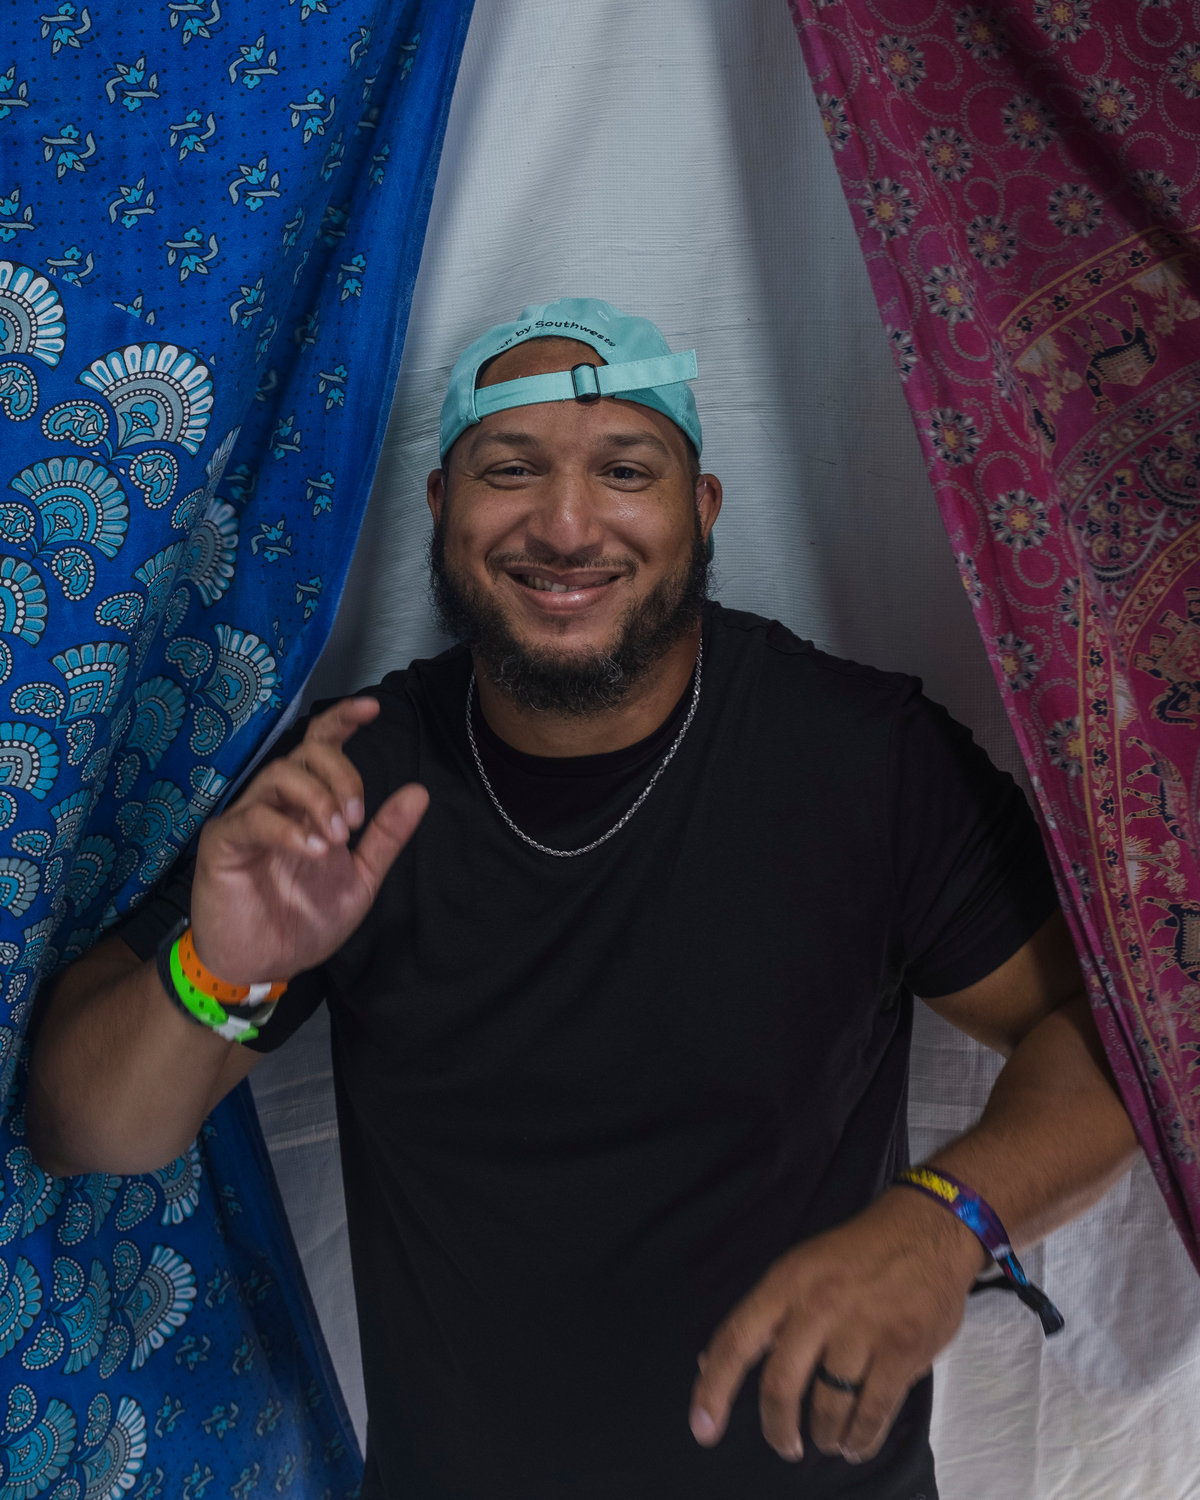 Martise Colston, a sign language interpreter with Amber G. Productions, stands for a portrait at the media tent during Hangout Fest.